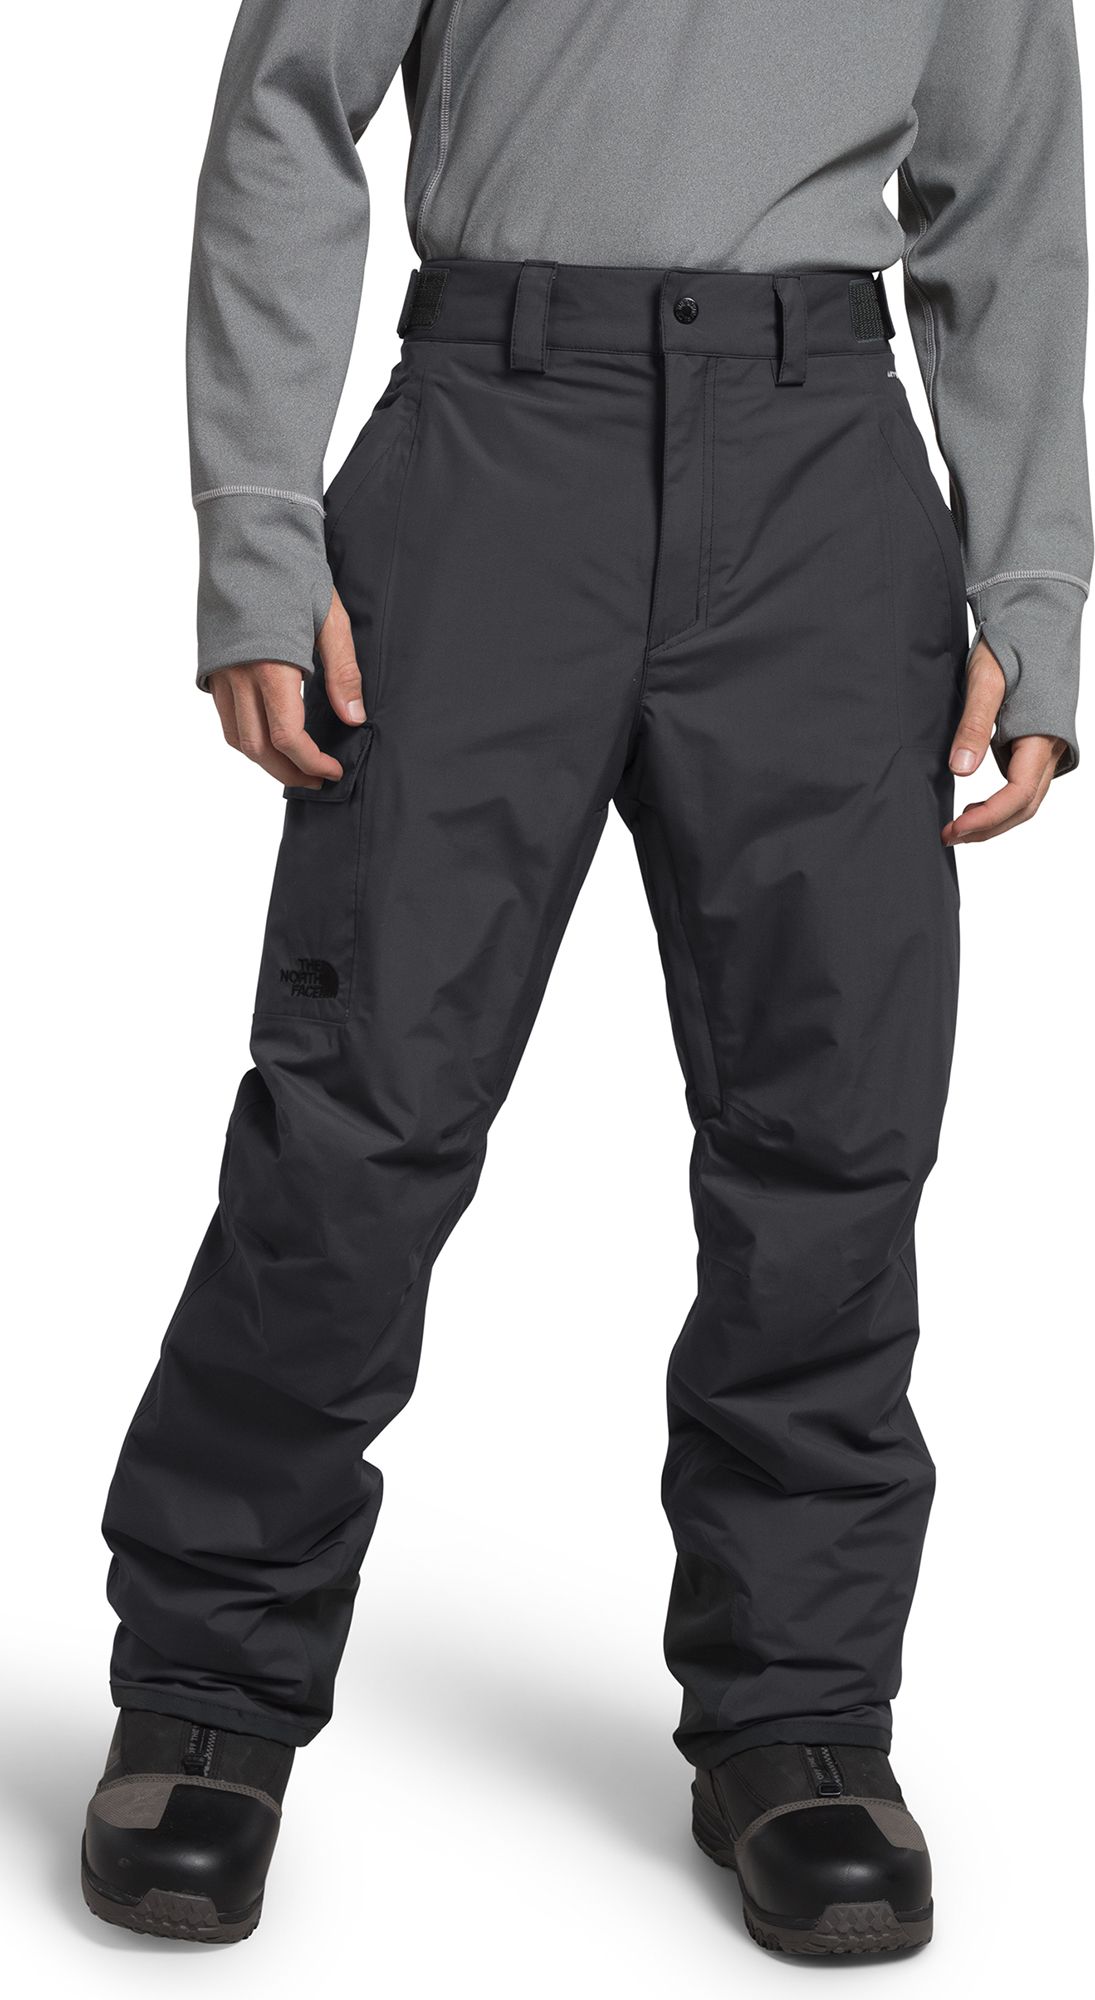 Photos - Ski Wear The North Face Men's Freedom Insulated Pants, XXL, Asphalt Grey 21TNOMMFRD 